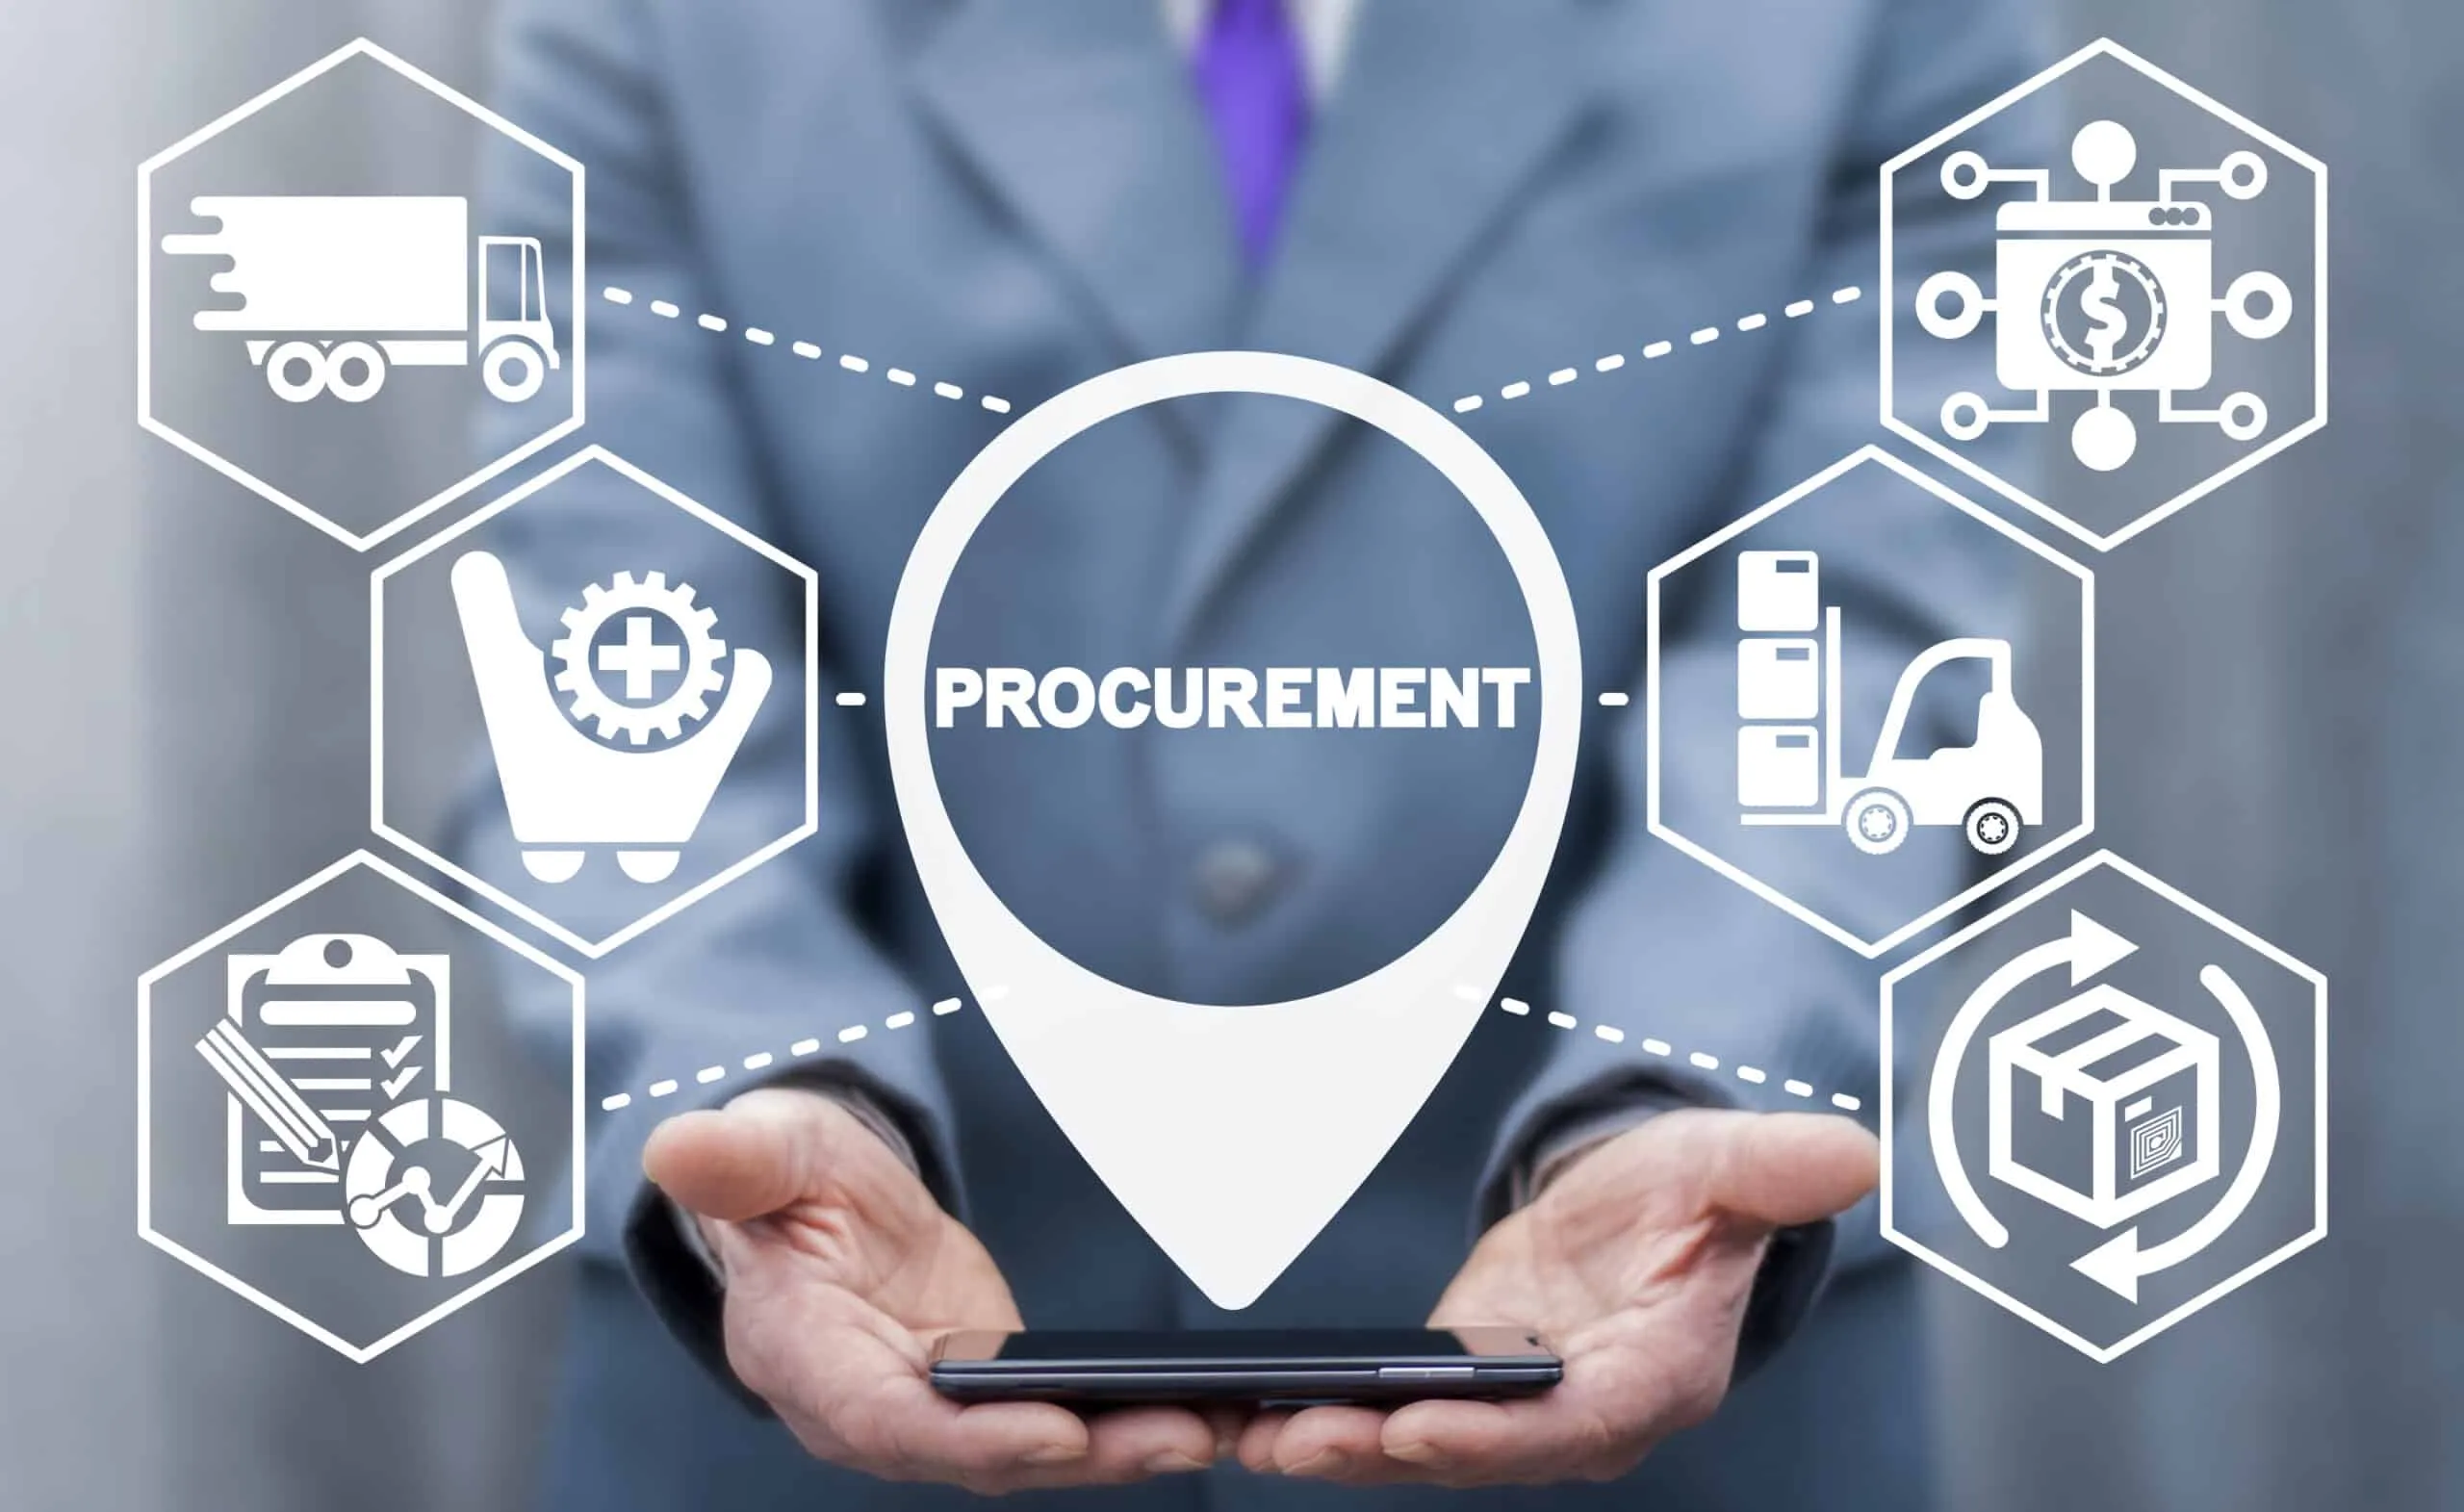 05 cases which are not applicable to procurement in Circular 58